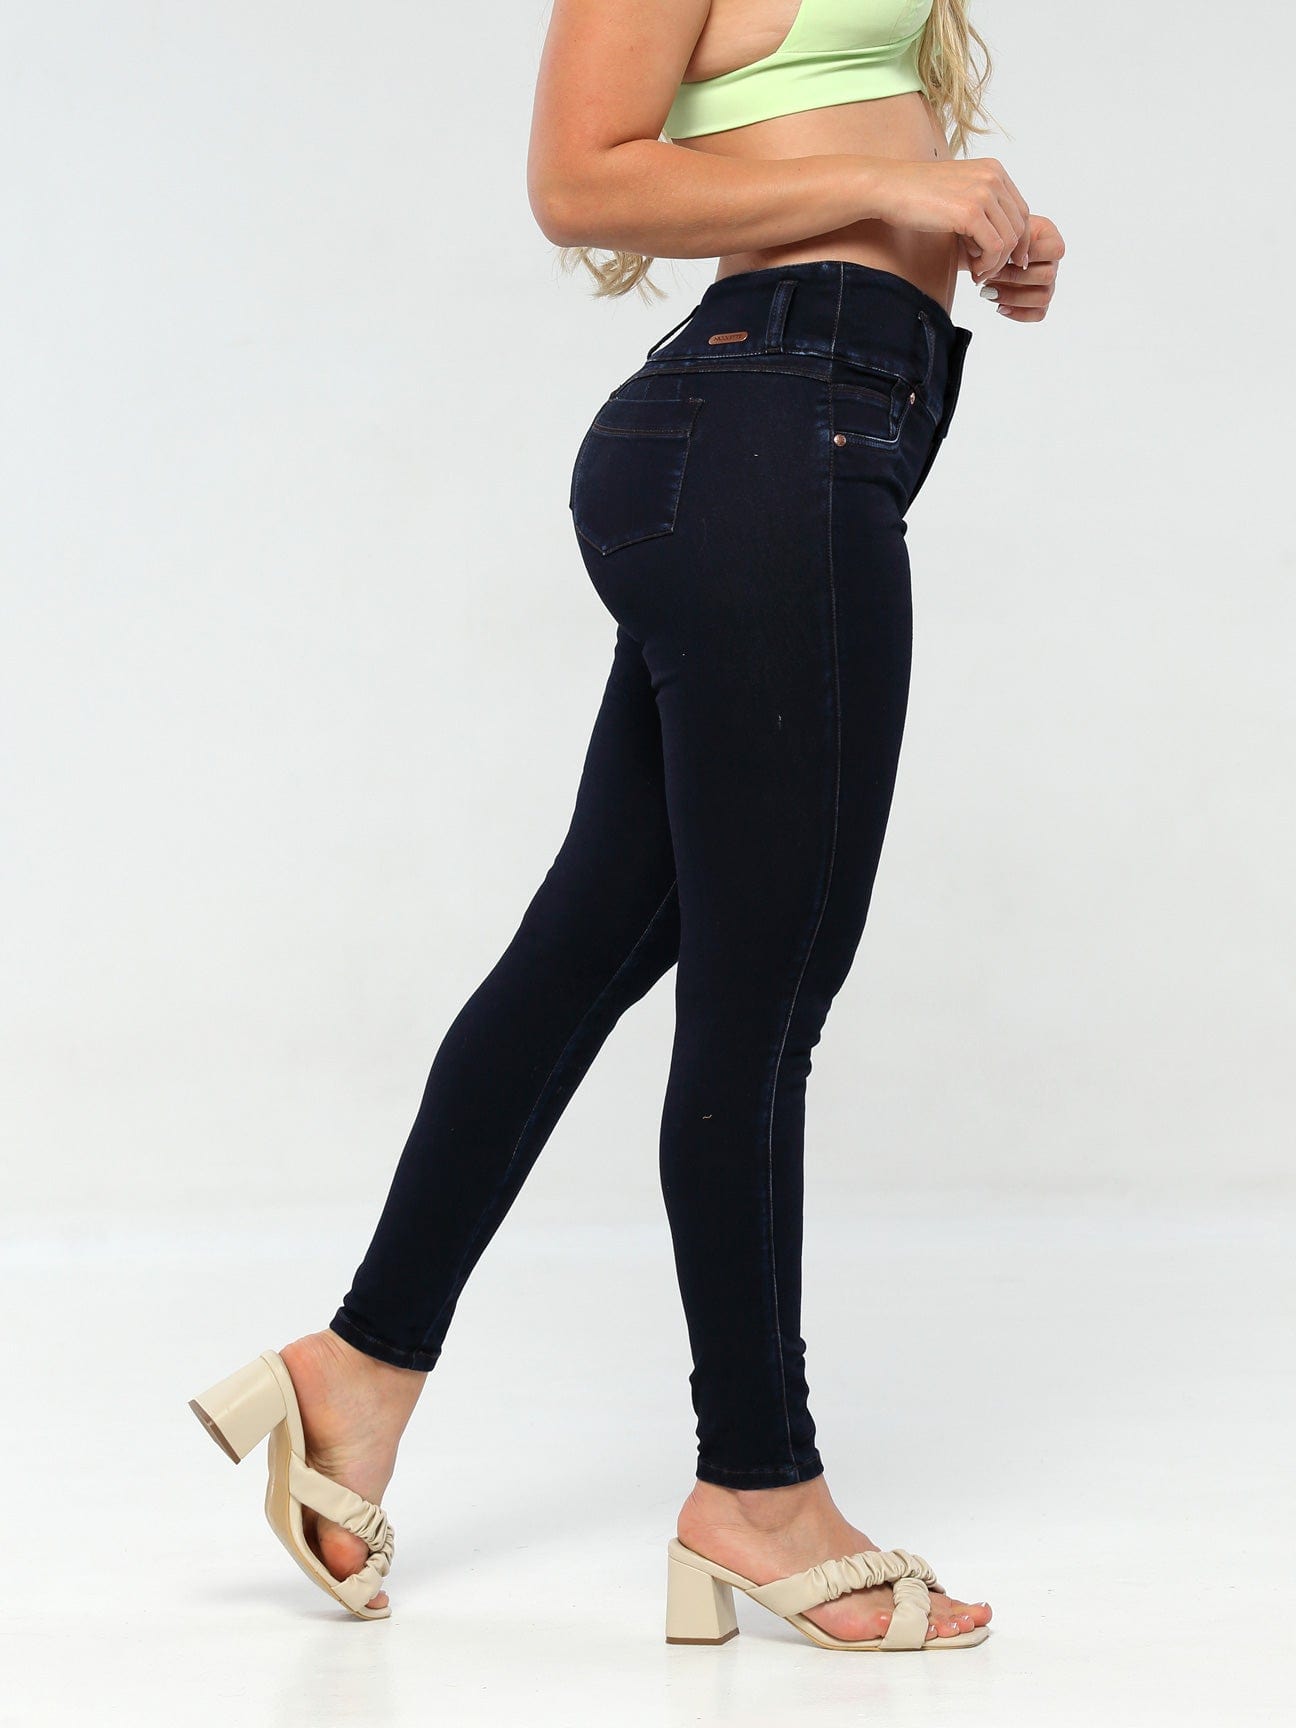 Crystal Butt Lift Jeans 14236